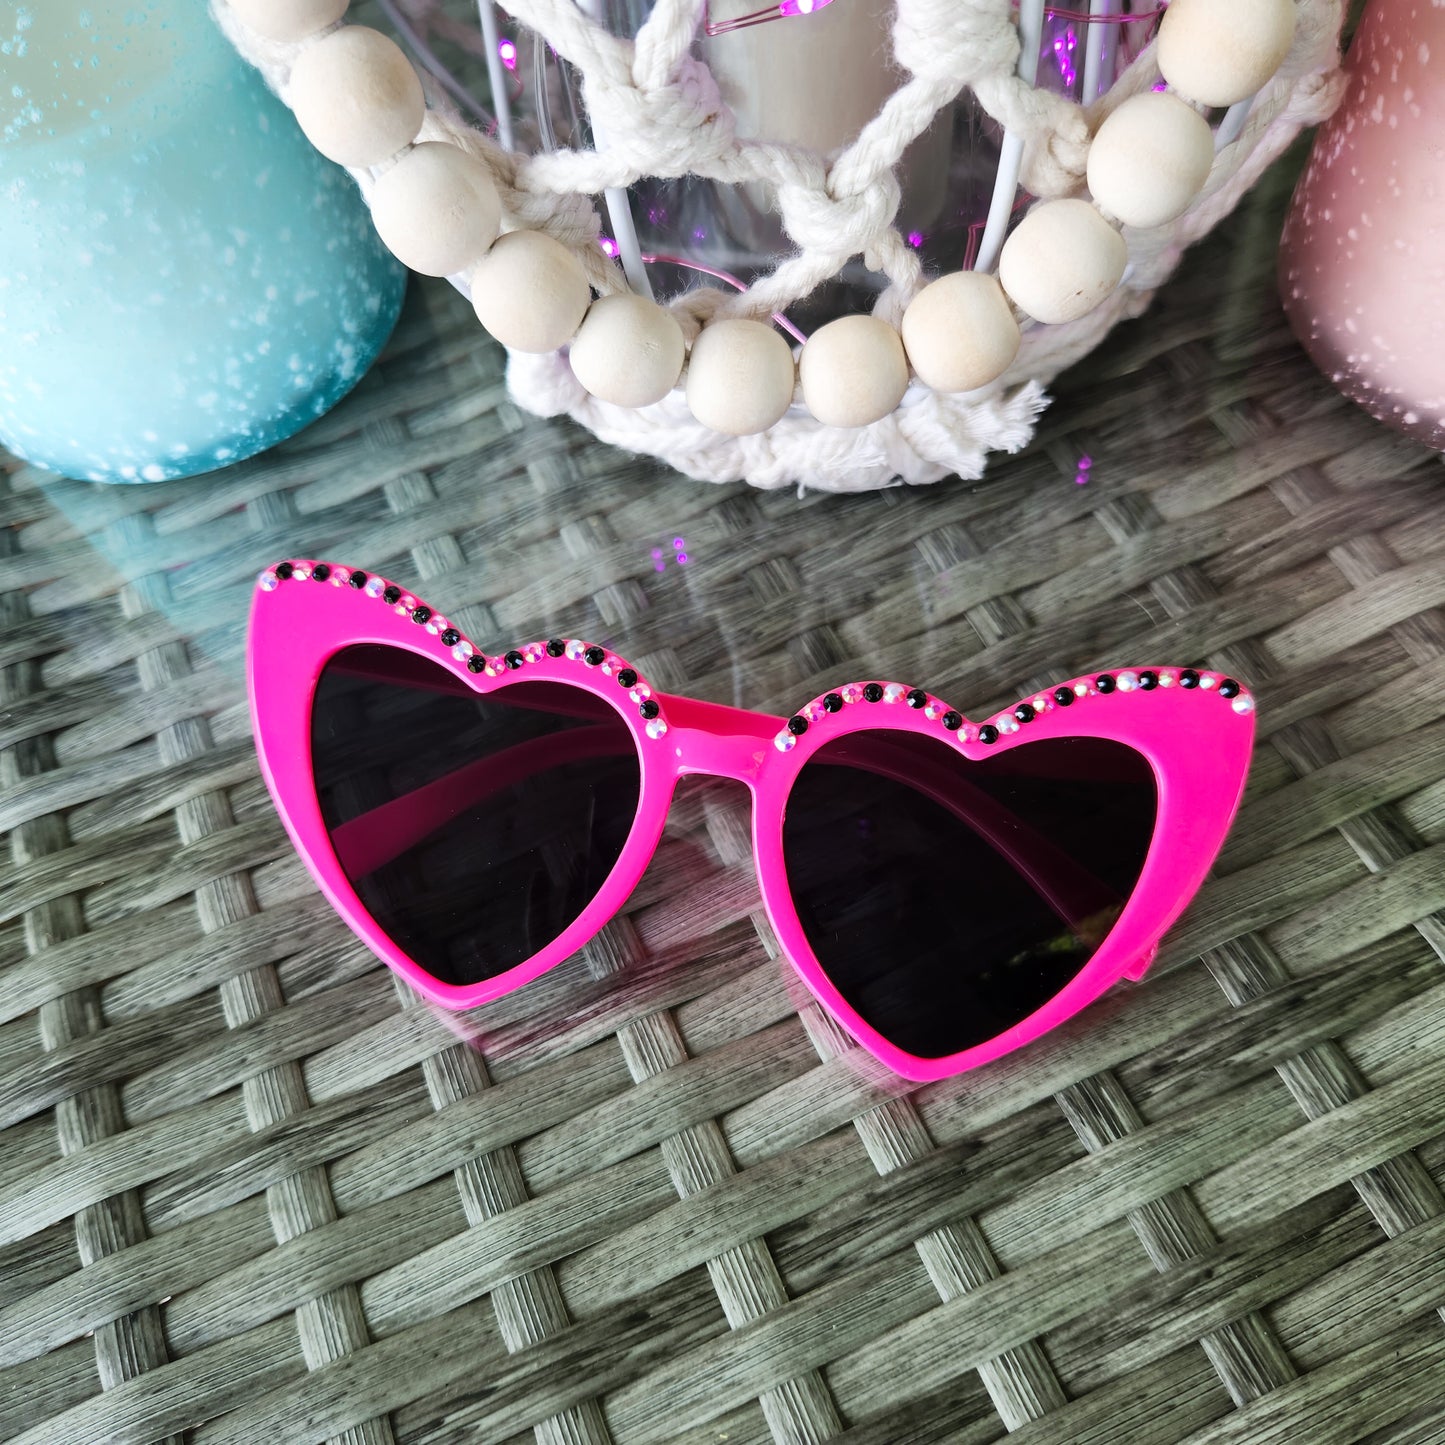 Malibu Pink Heart Shaped Sunnies with Black and Pink Rhinestone Accents